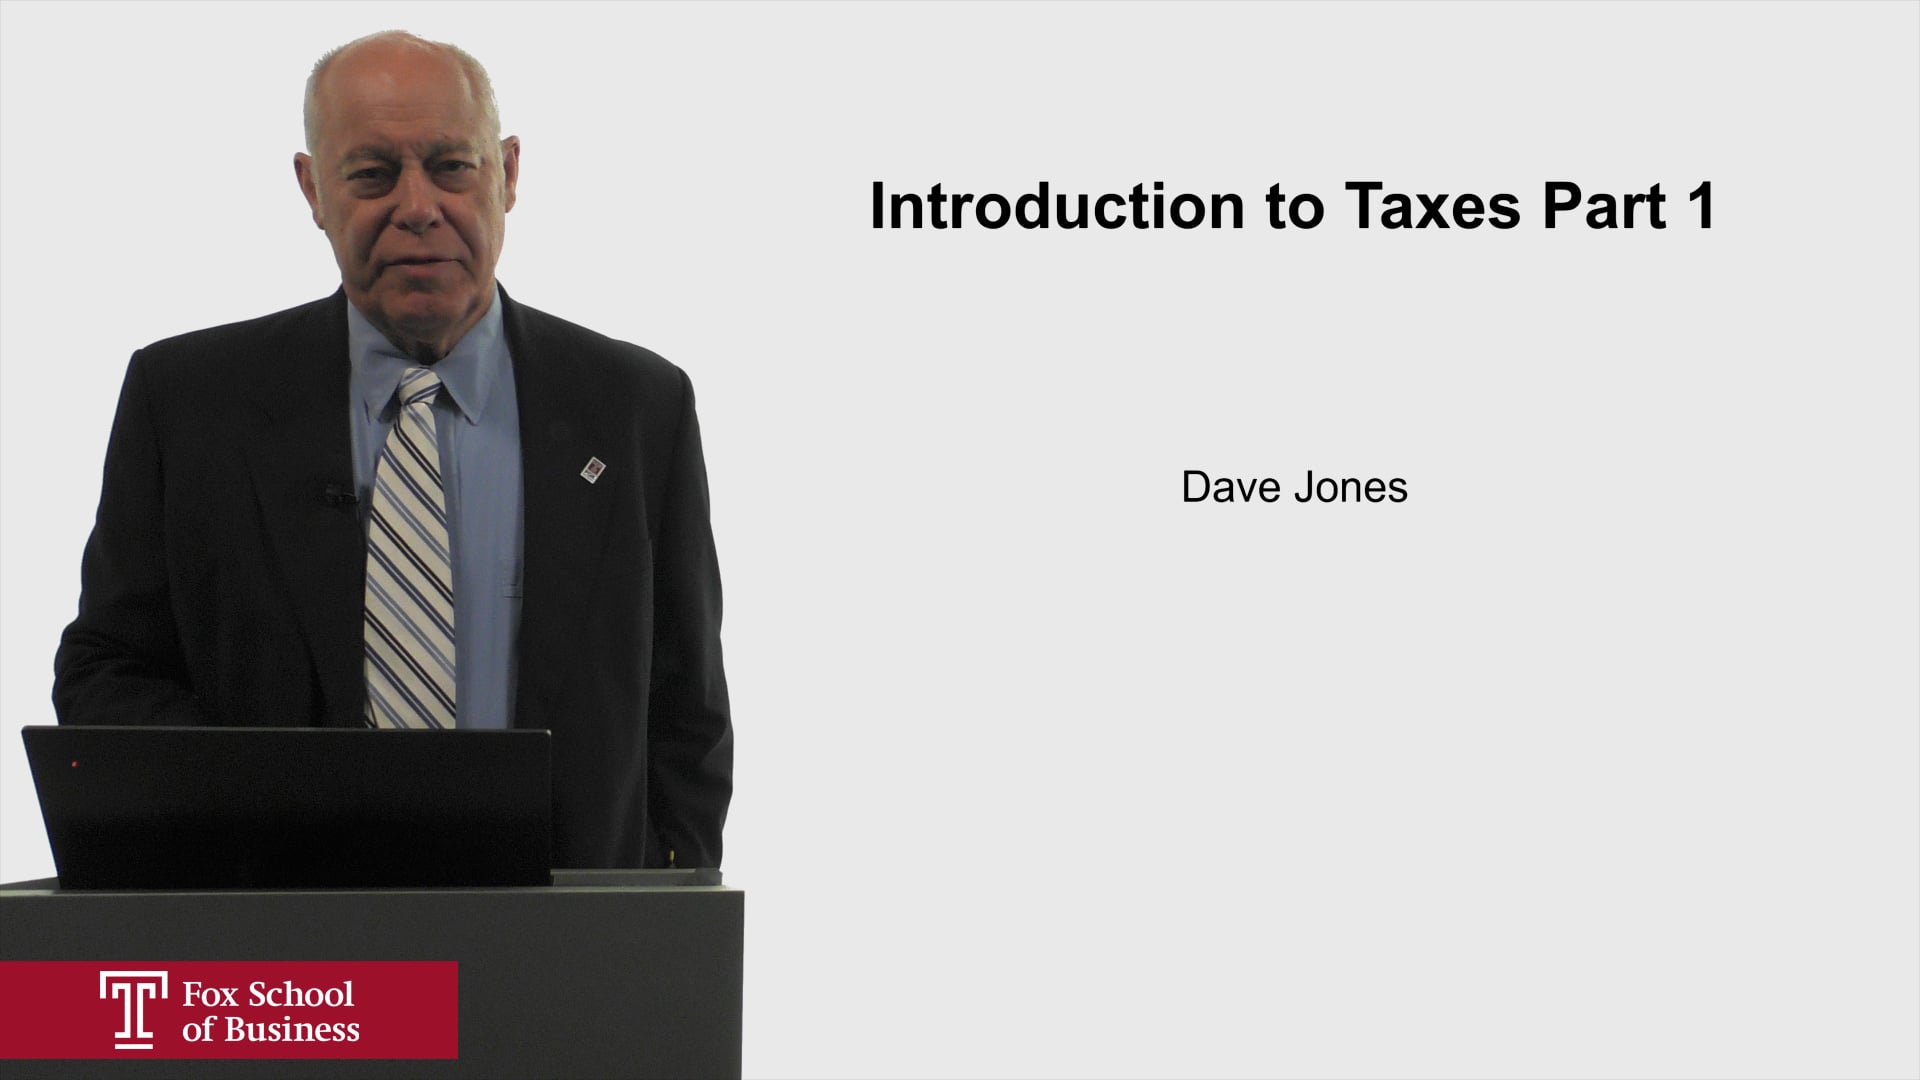 Introduction to Taxes Part 1